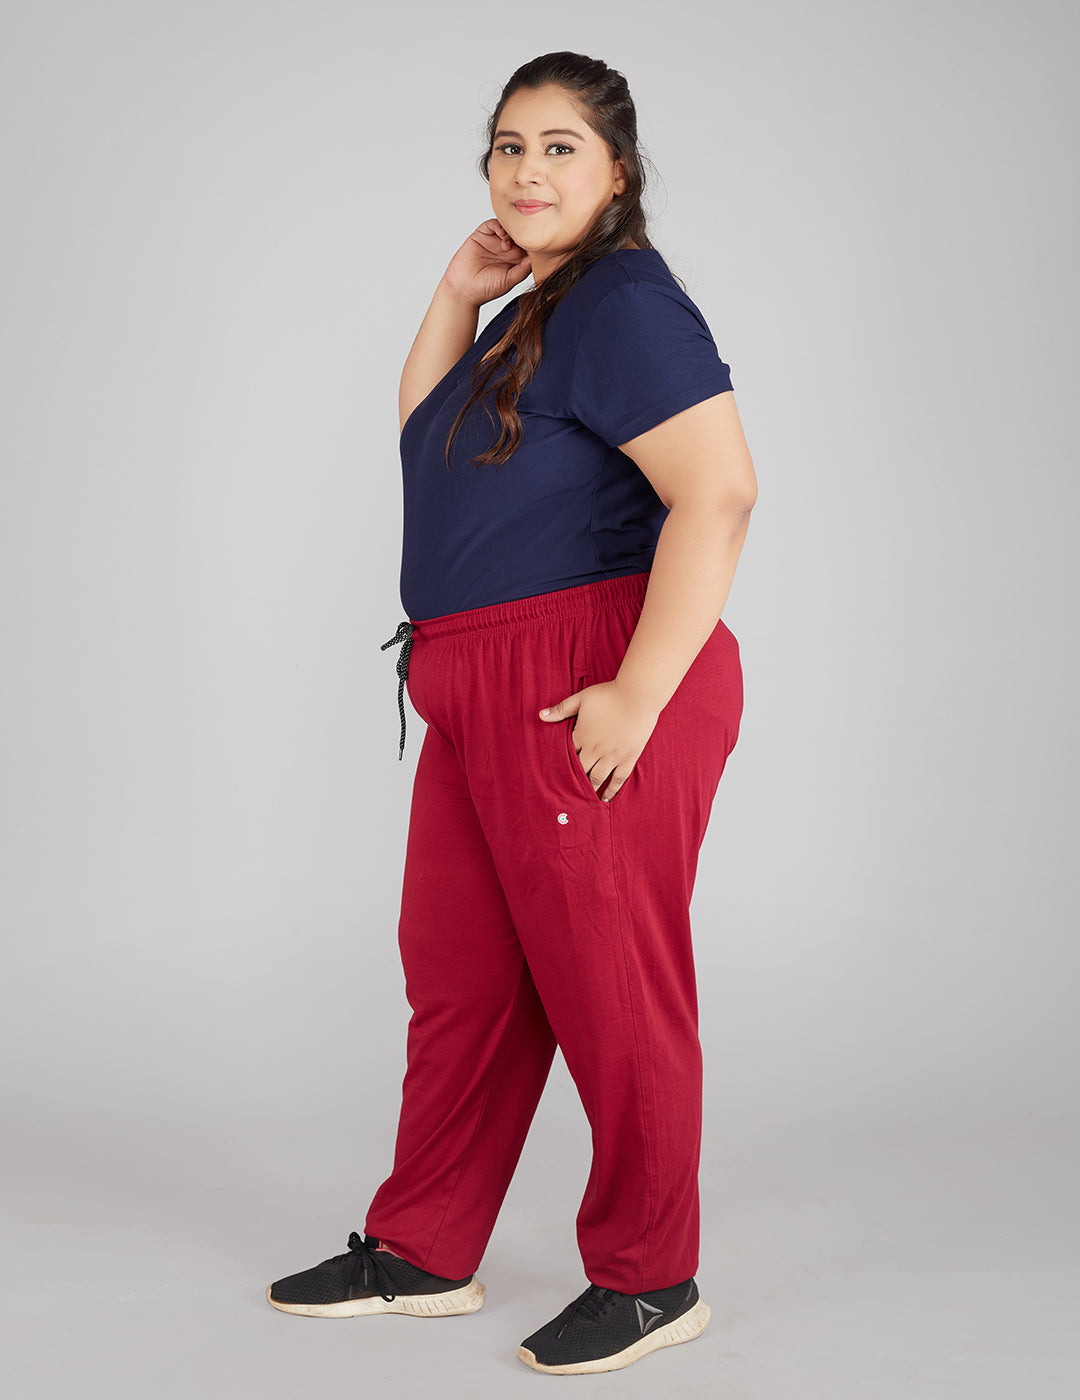 Cotton Track Pants For Women Pack of 3 (Plum, Cardamom Green &Teal )